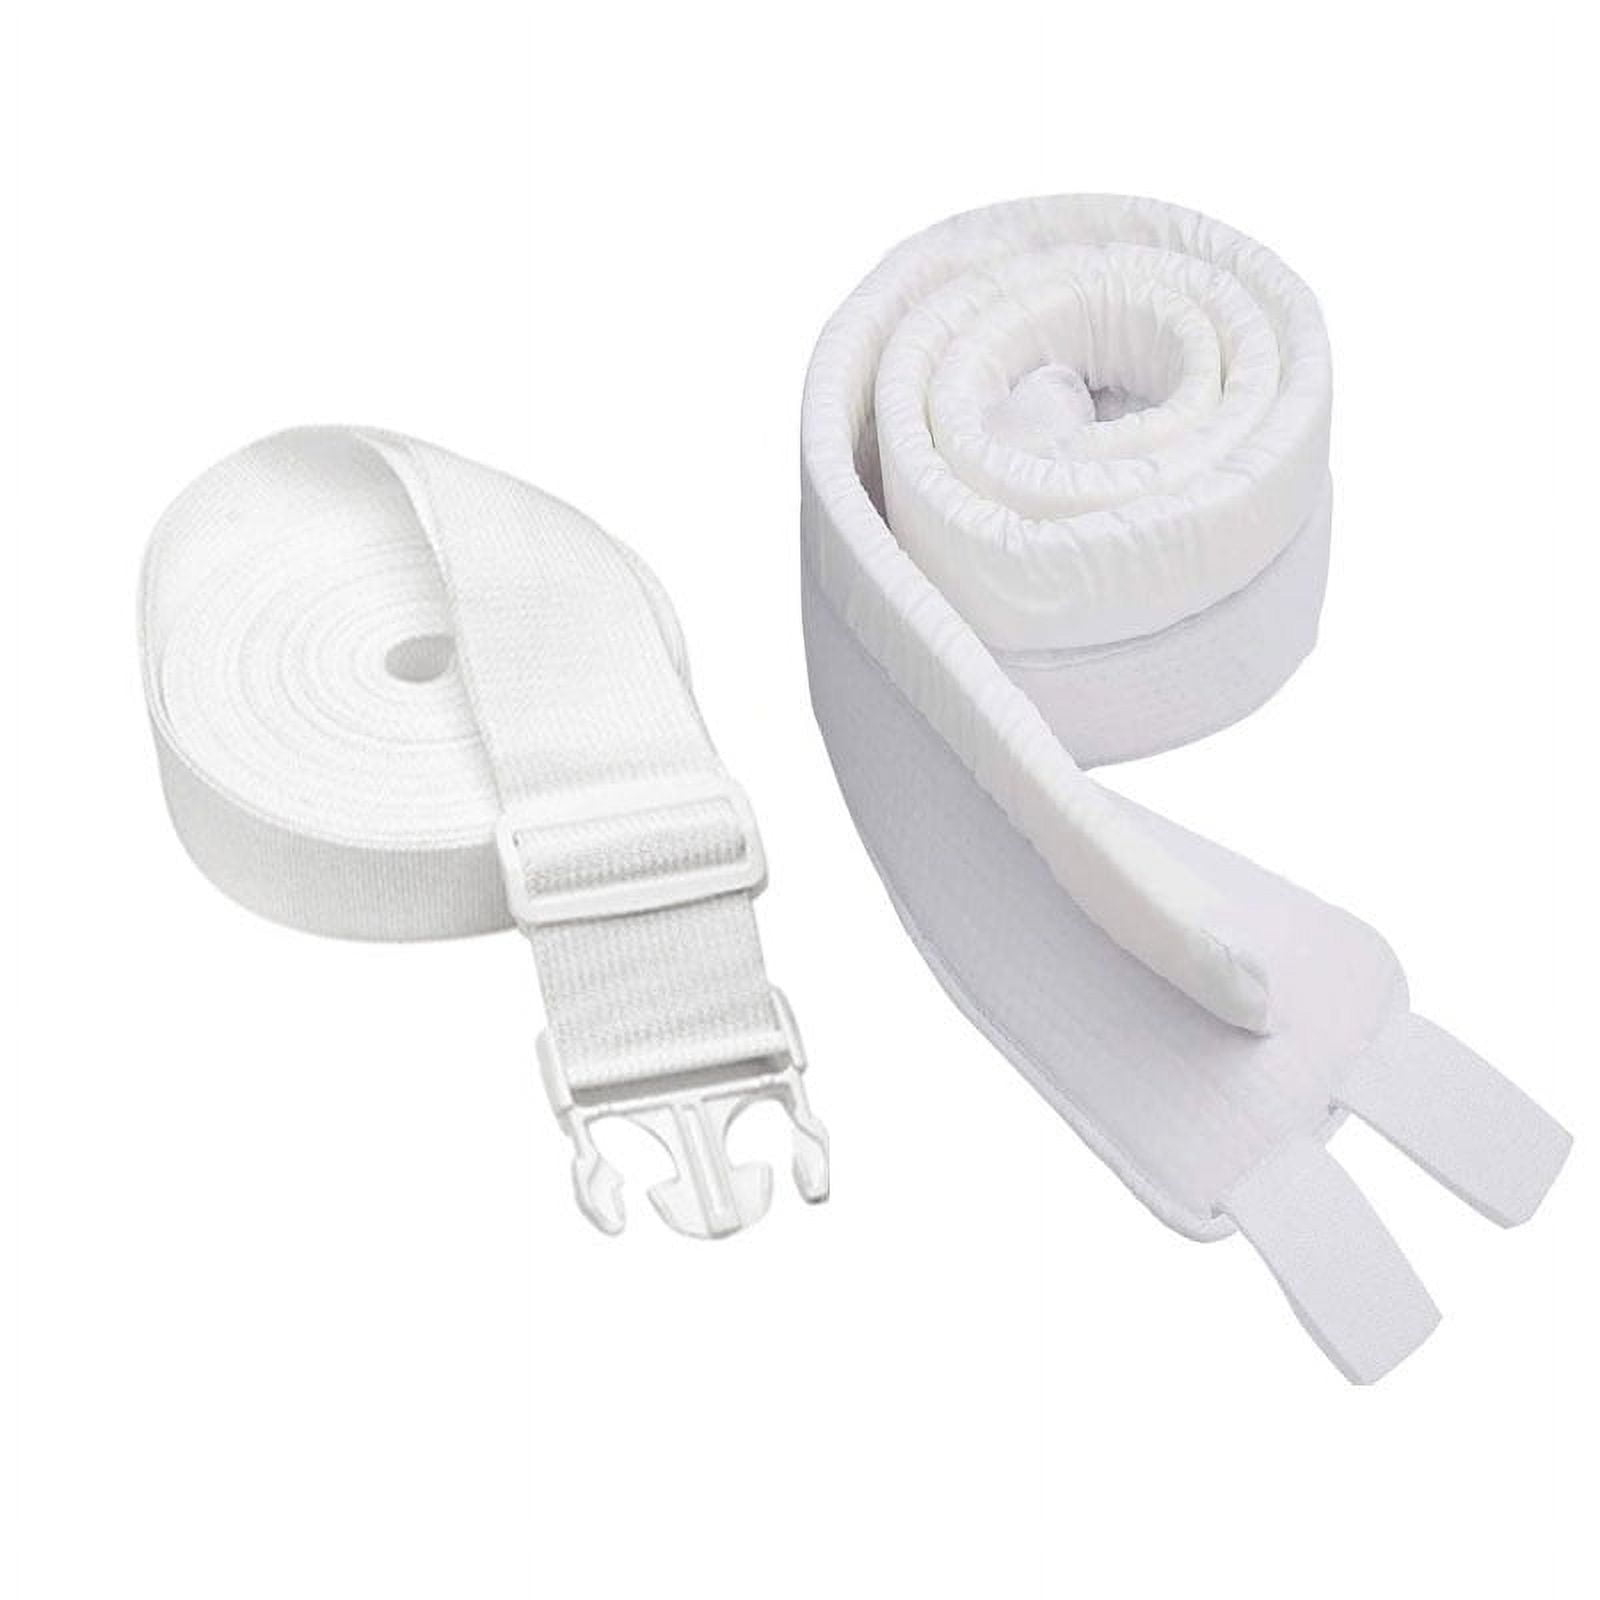 Bed Bridge Twin to Converter Kit Adjustable Mattress Connector for Bed BedspaceFiller Twin Bed Connector, White